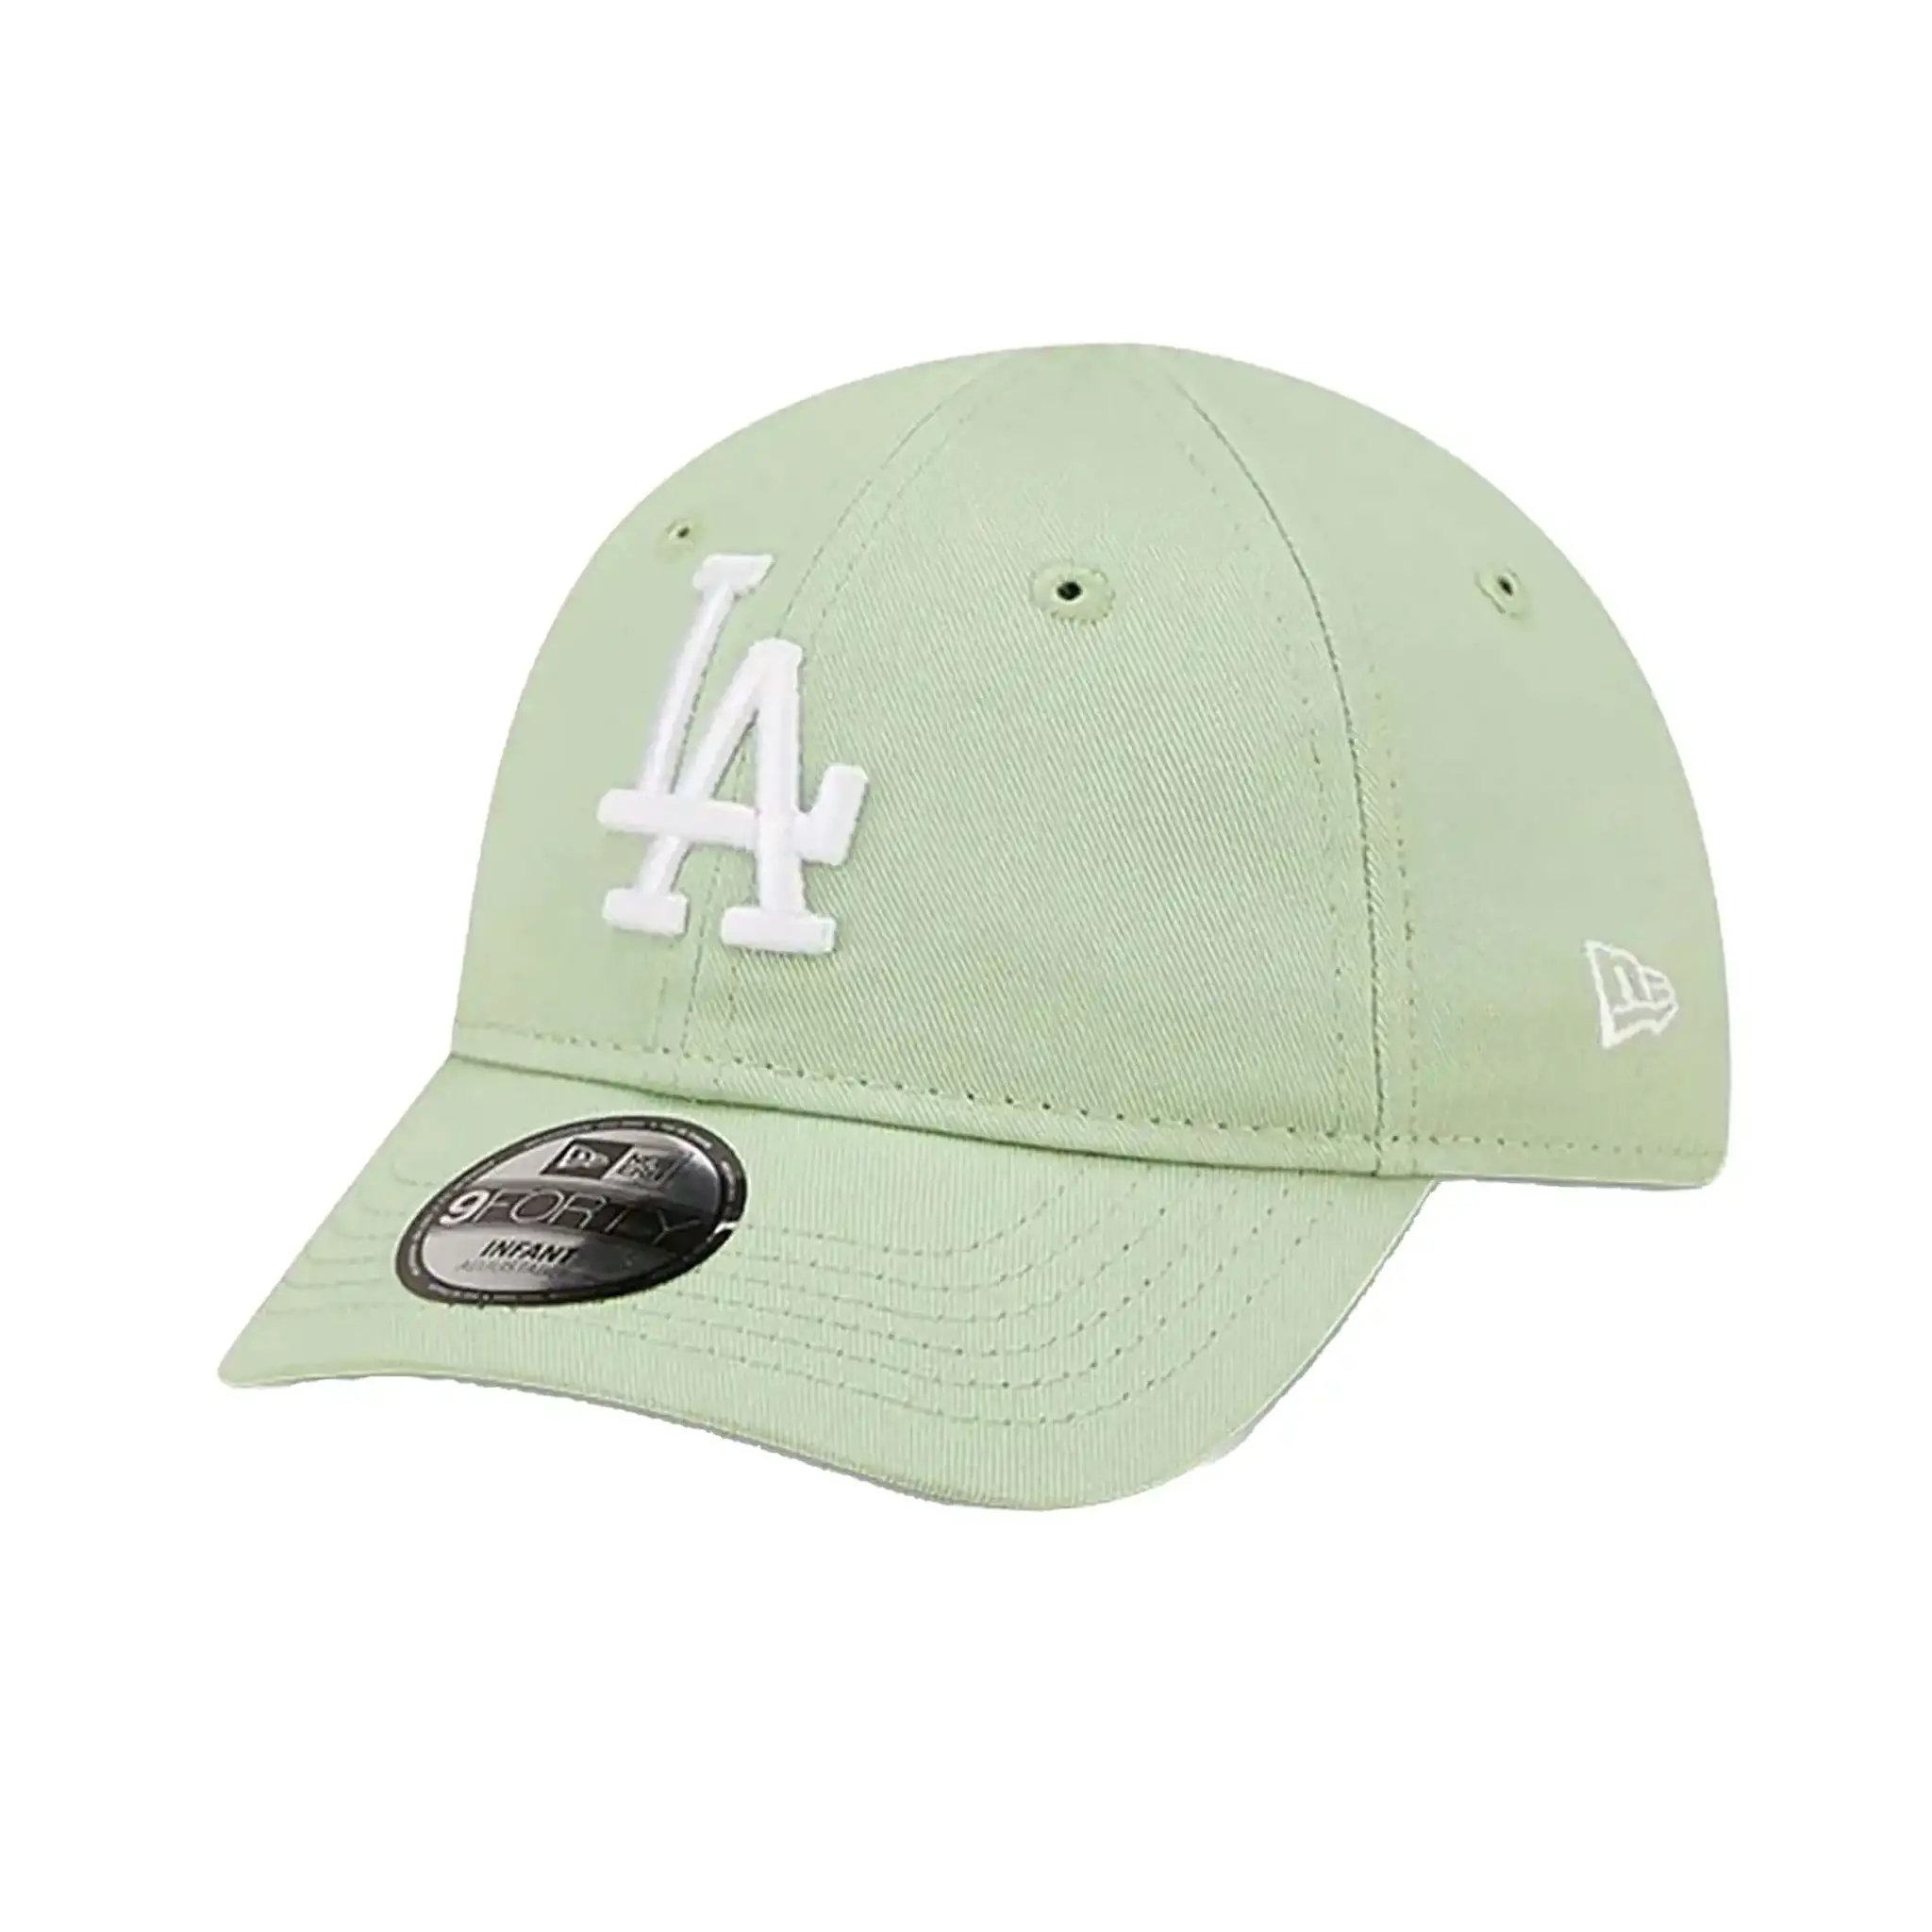 New Era Los Angeles Dodgers 9Forty Infant Cap Green White